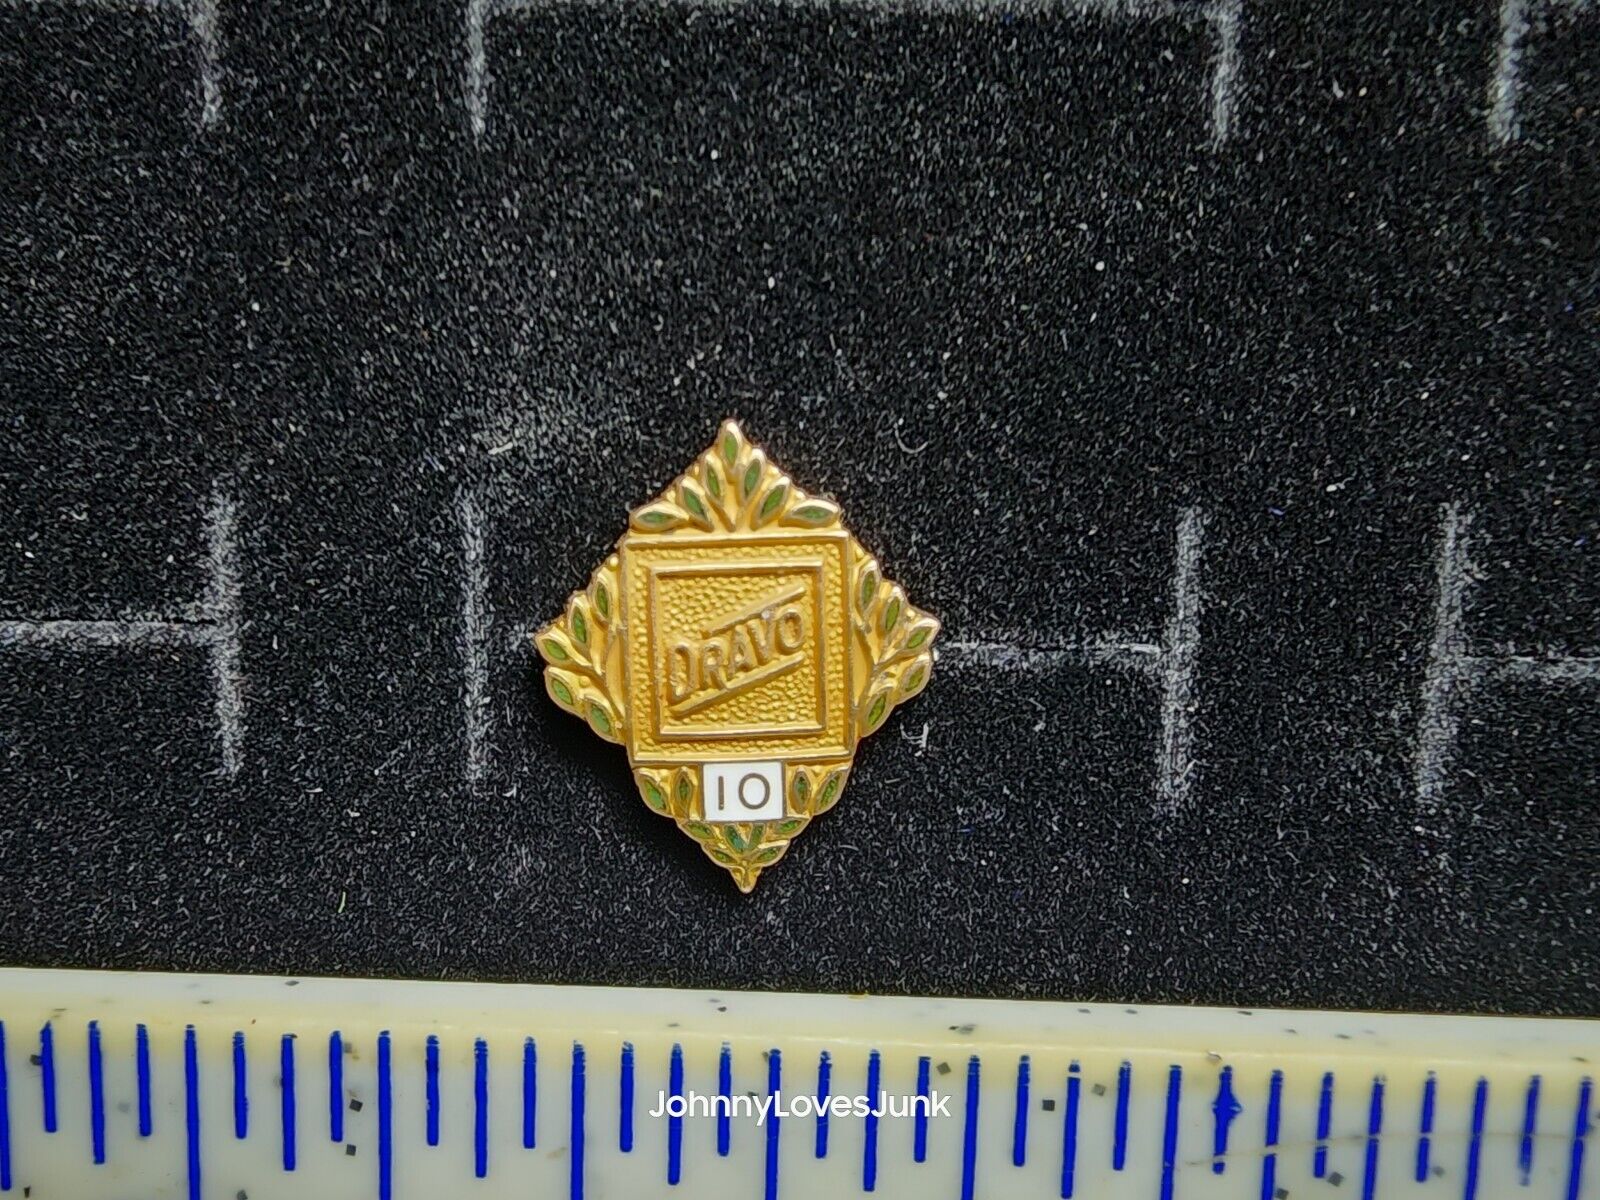 Vintage 10k Gold Dravo Service Pin  Pittsburgh PA Wilmington DE Marked/Tested+ 